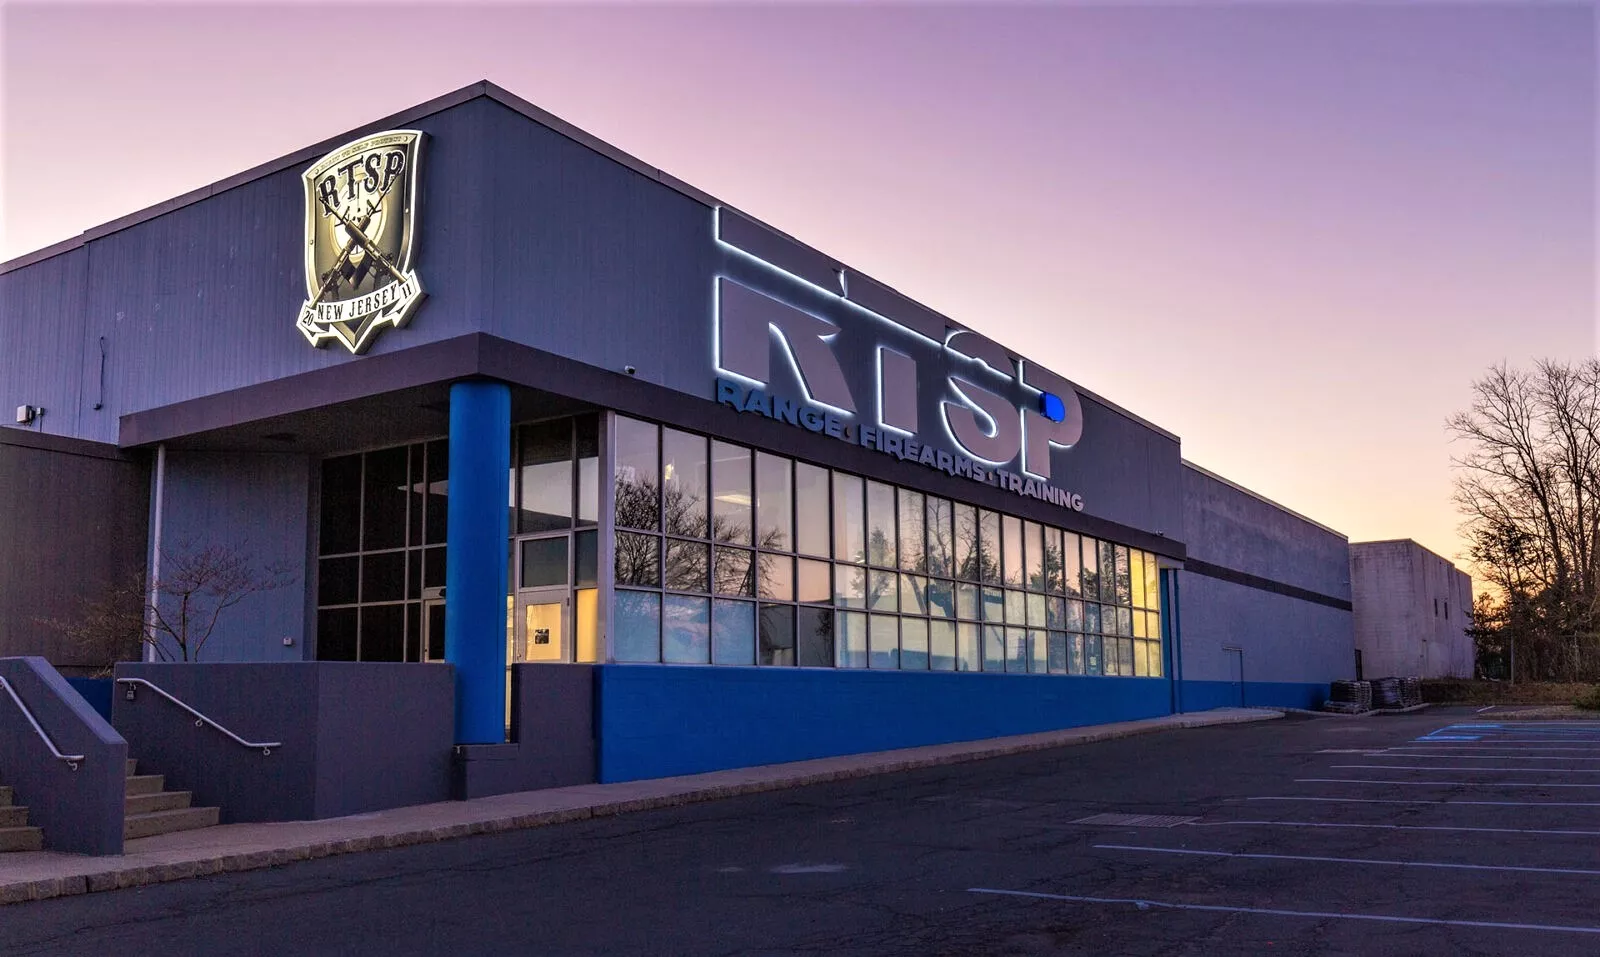 RTSP Union- Range, Firearms & Training in USA, North America | Gun Shooting Sports - Rated 7.2